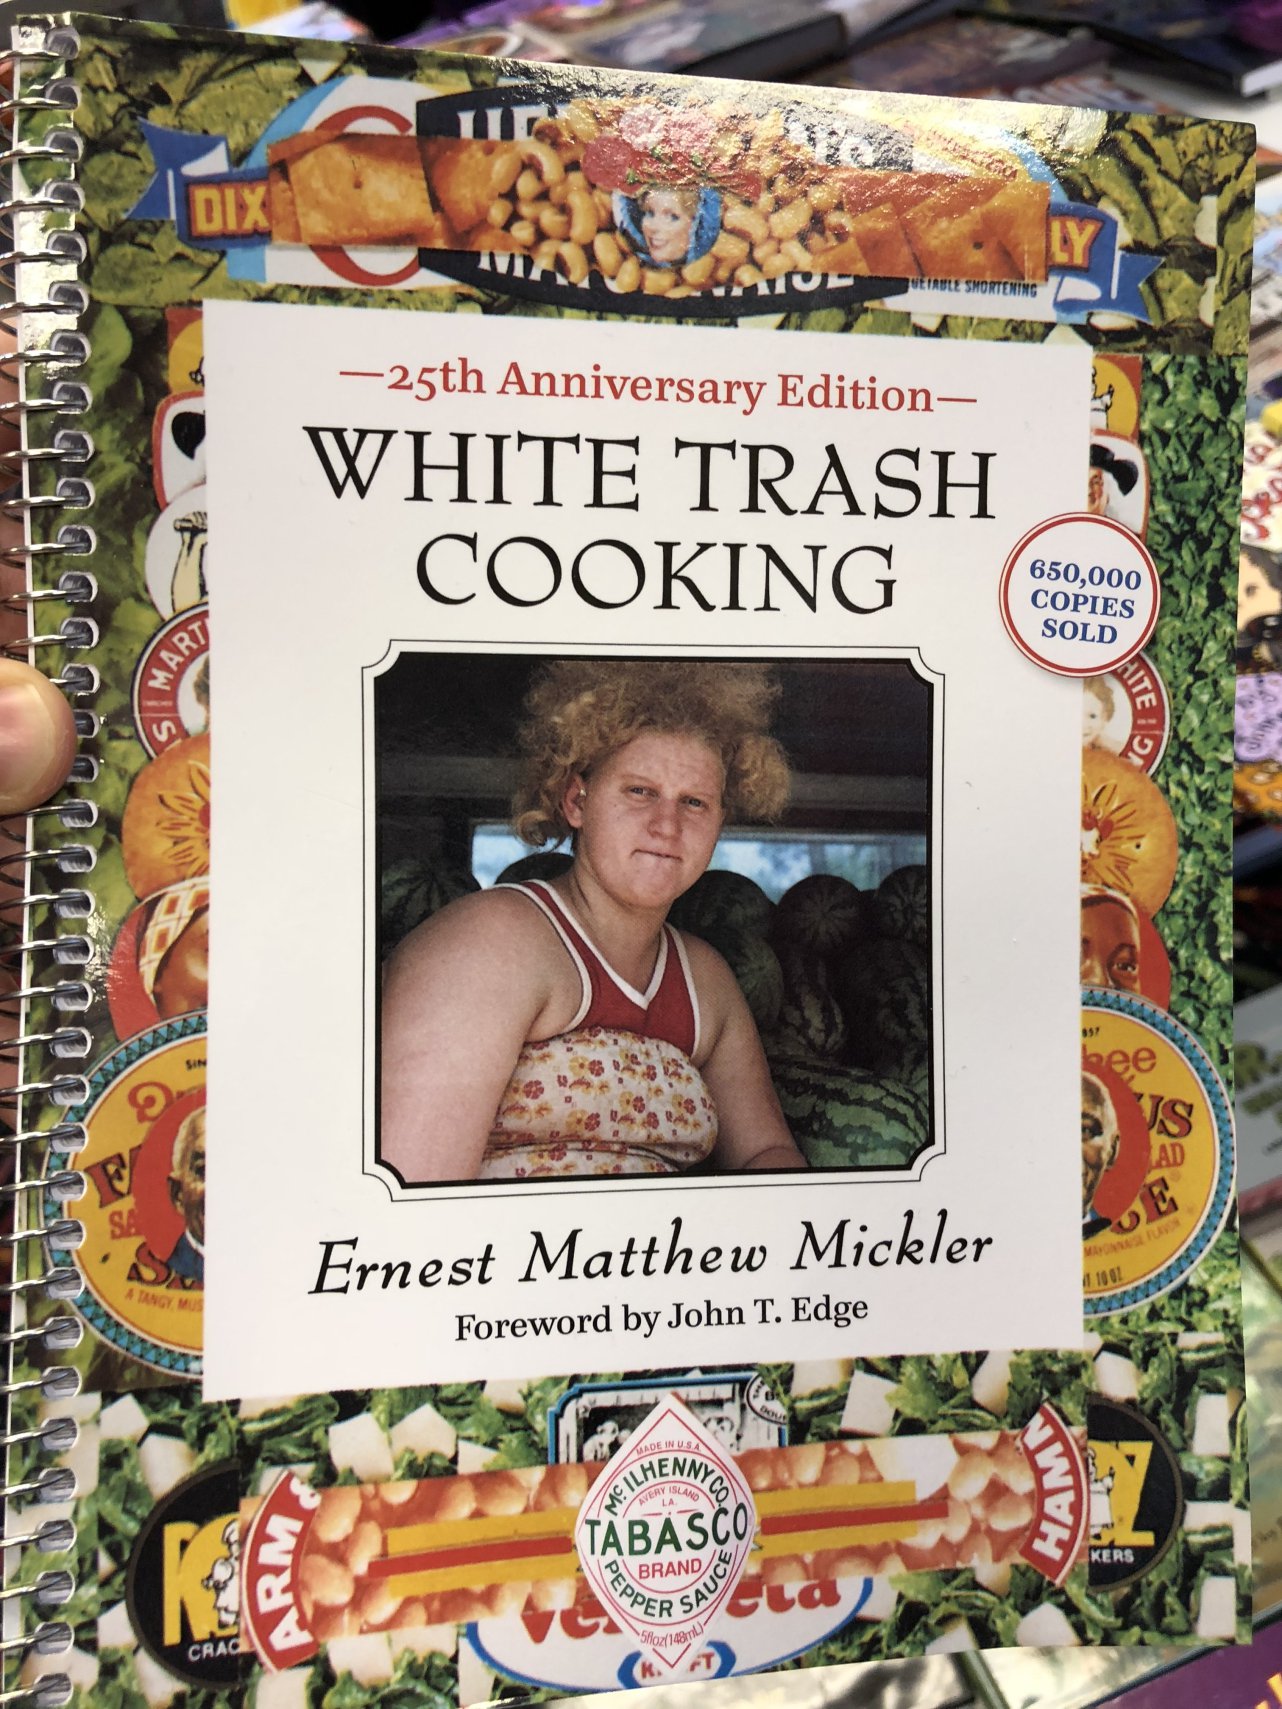 thrift store White Trash Cooking - 25th Anniversary Edition White Trash Cooking 650,000 Copies Sold ucun Uu Dodolog Ernest Matthew Mickler Foreword by John T. Edge Whenna Tabasco